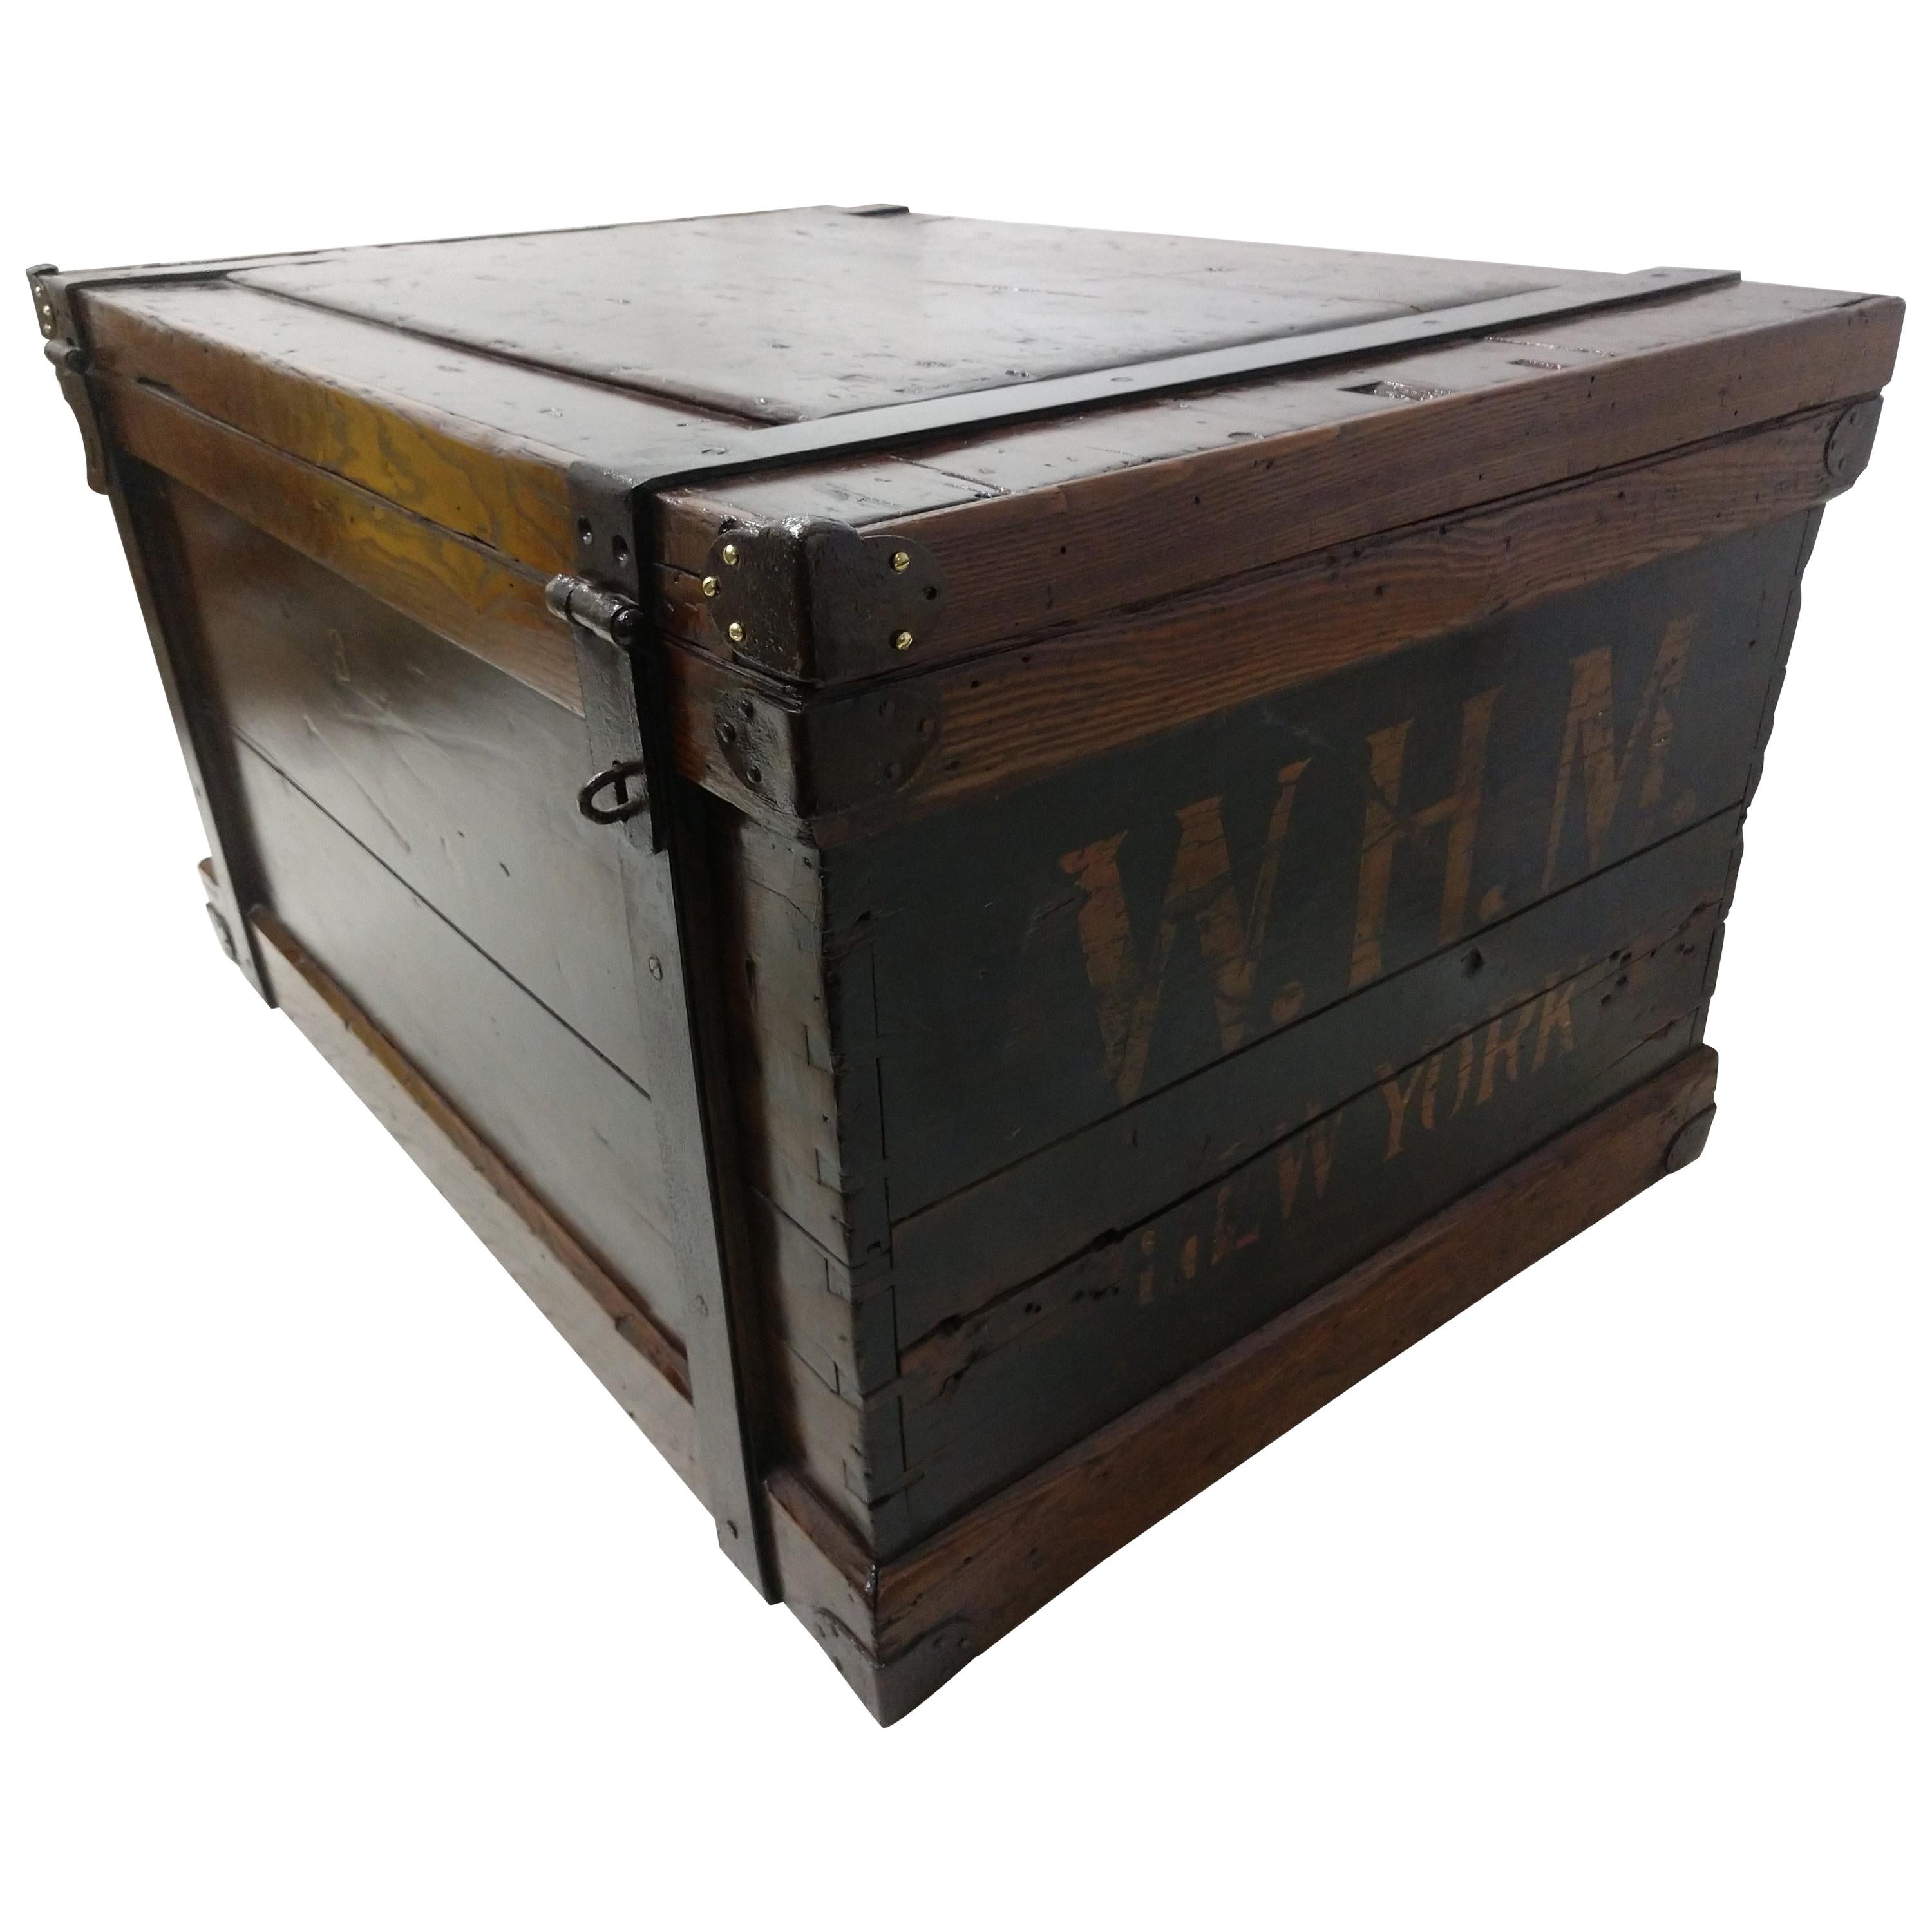 Mid-19th Century Handcrafted Wood & Iron Steamer Trunk